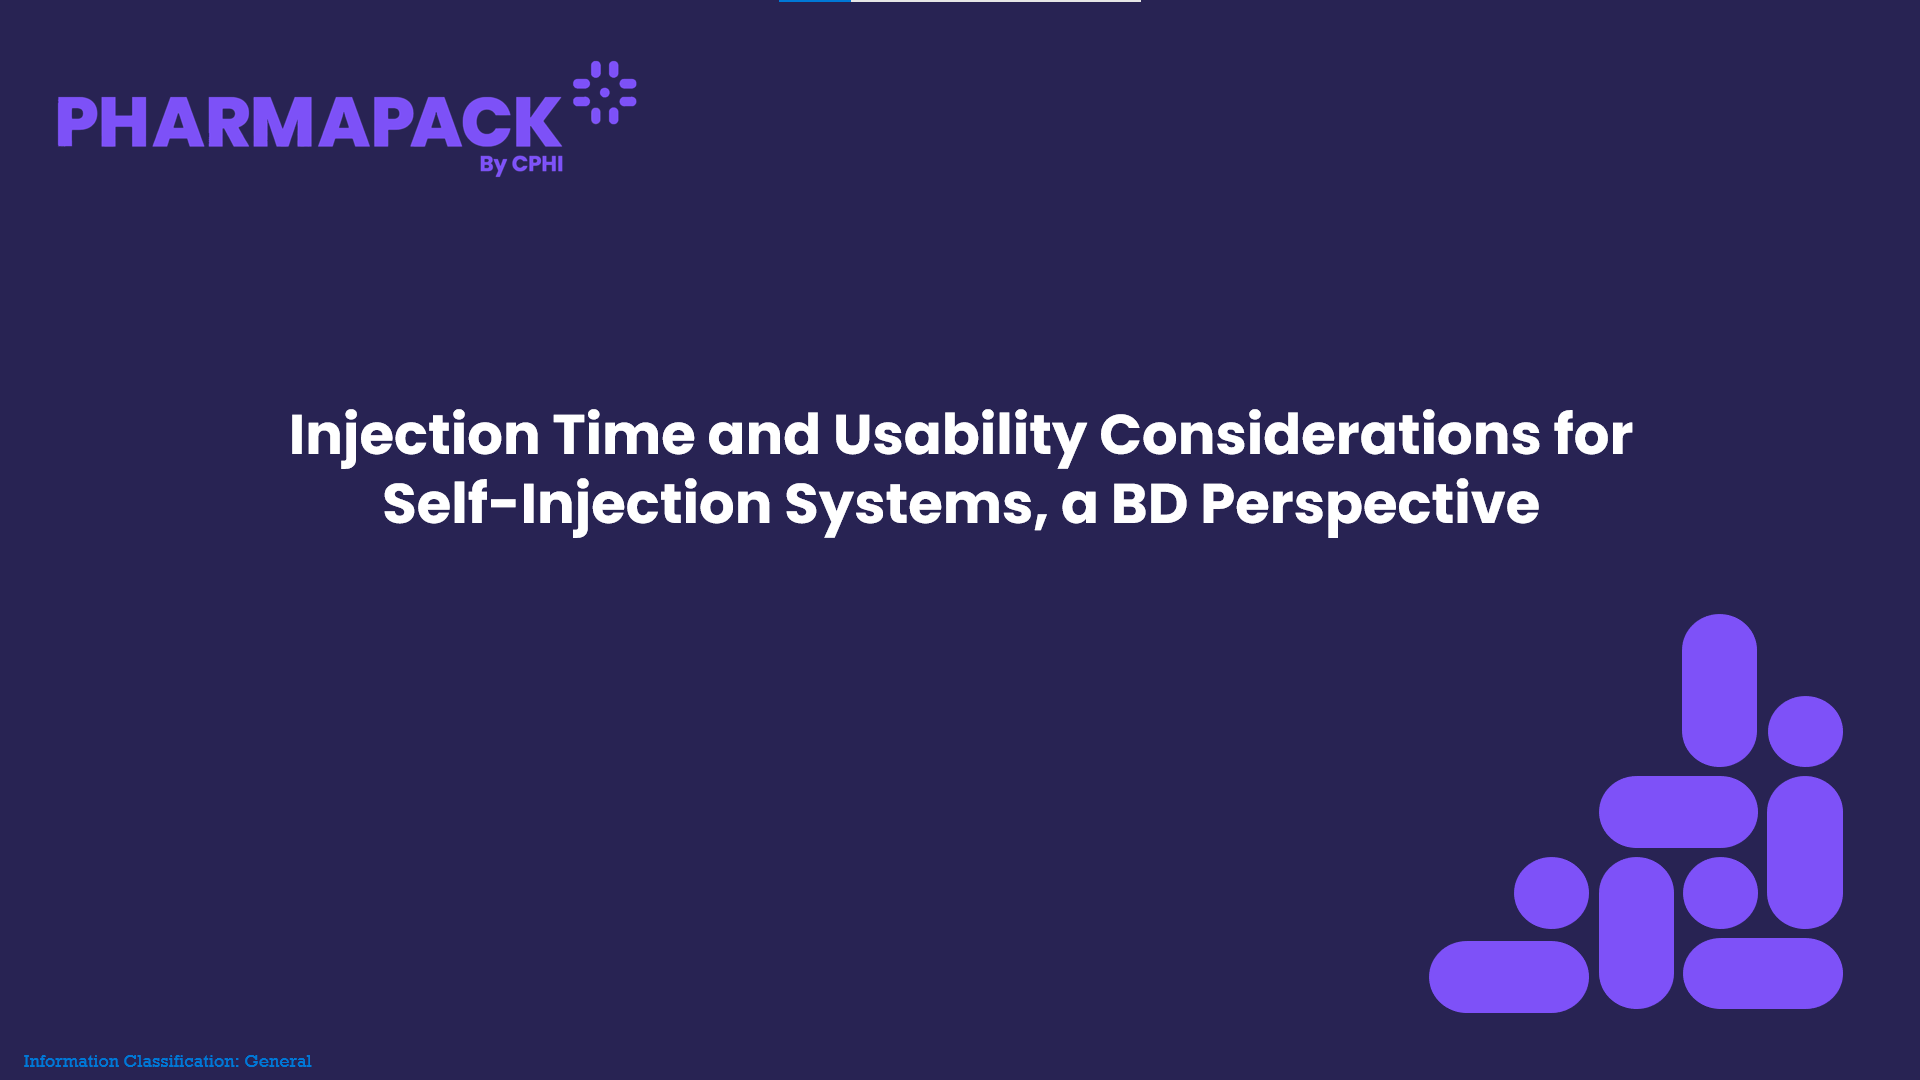 Injection Time and Usability Considerations for Self-Injection Systems, a BD Perspective